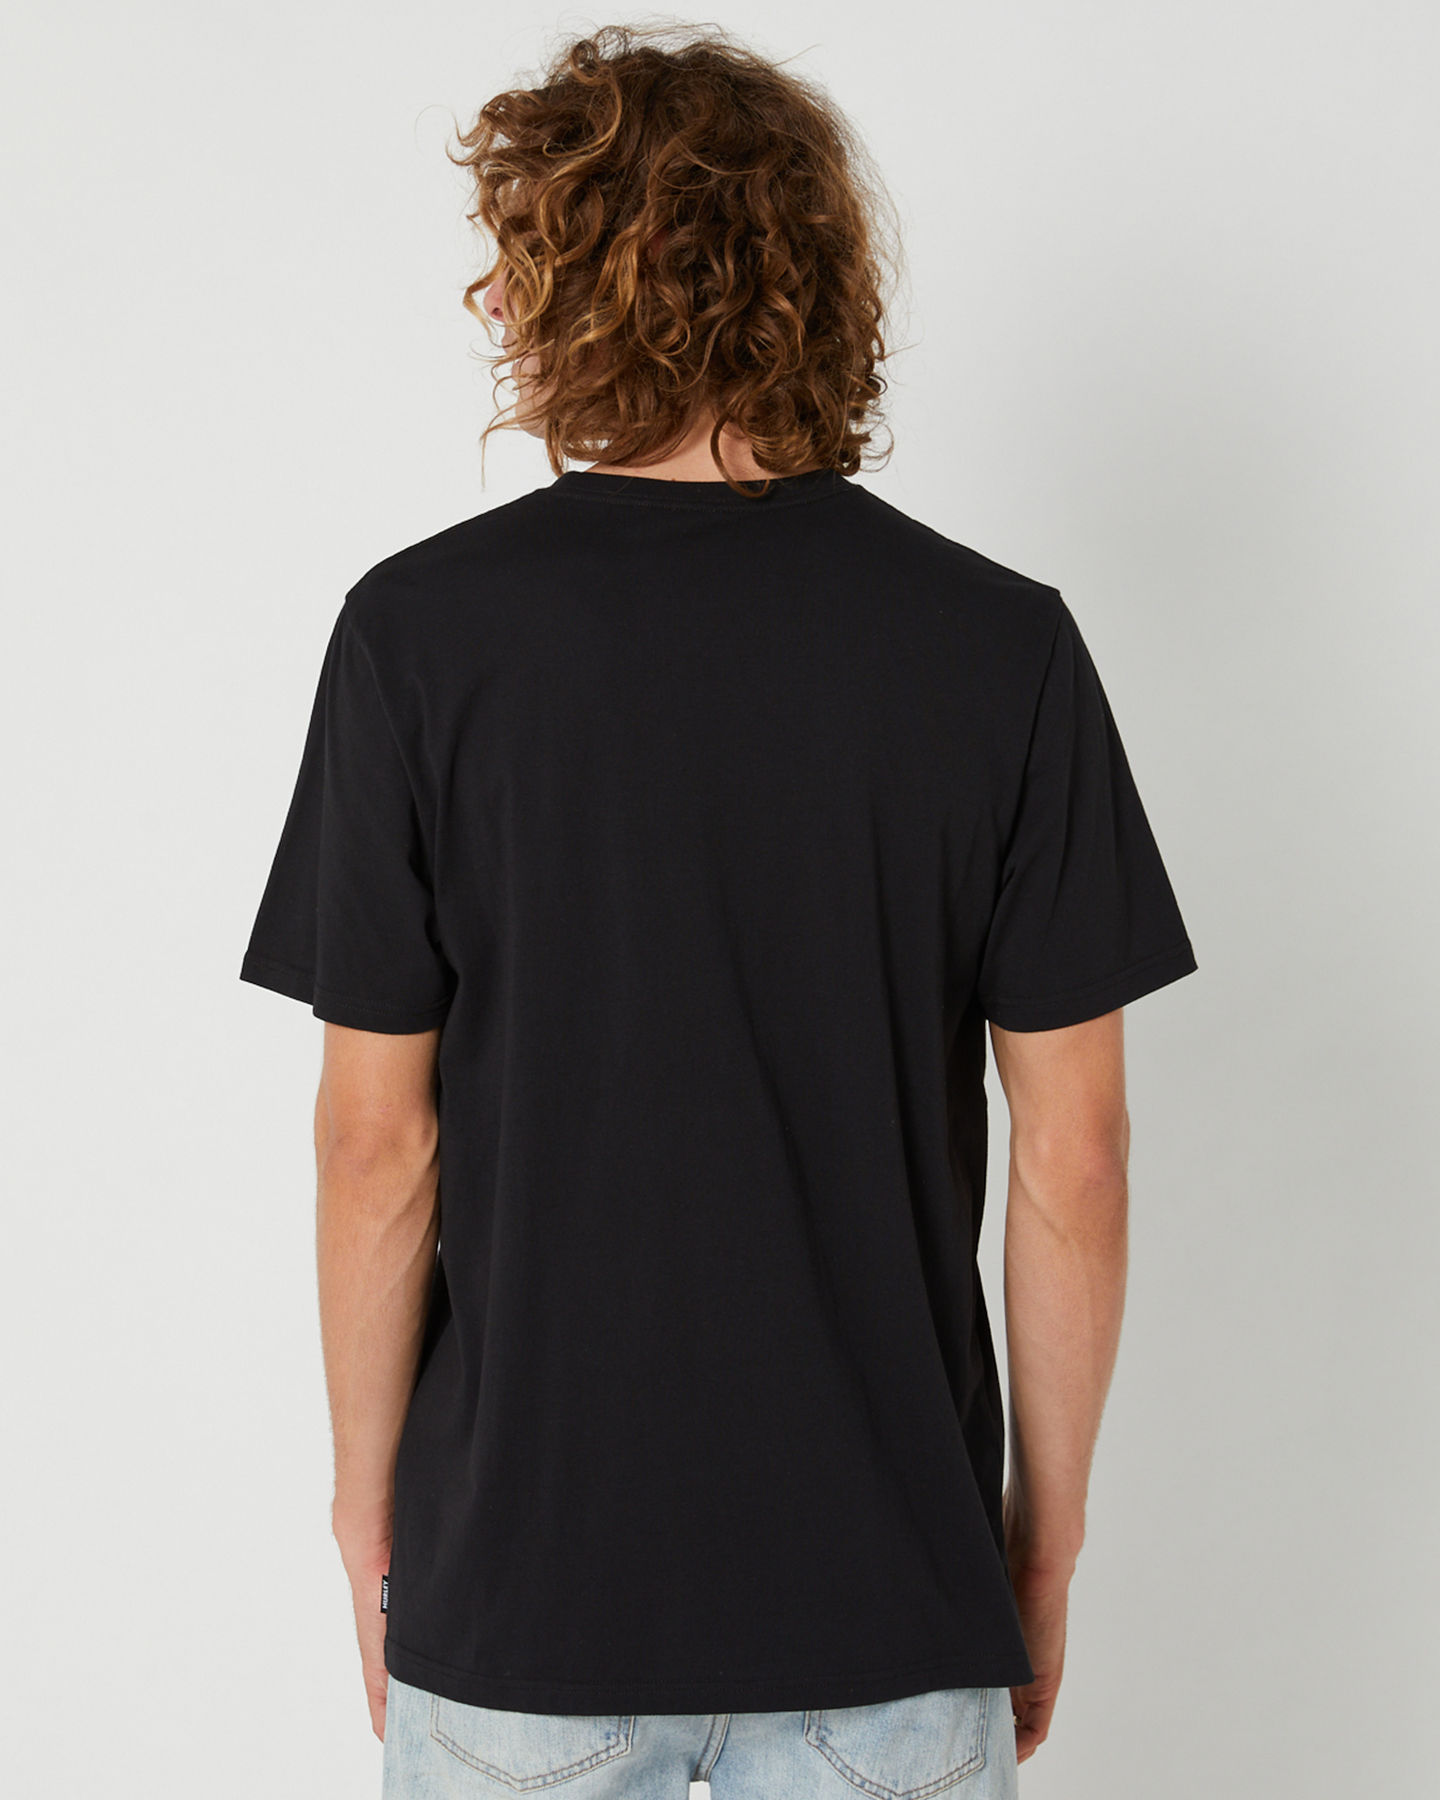 Hurley One And Only Ss Tee - Black Grey | SurfStitch